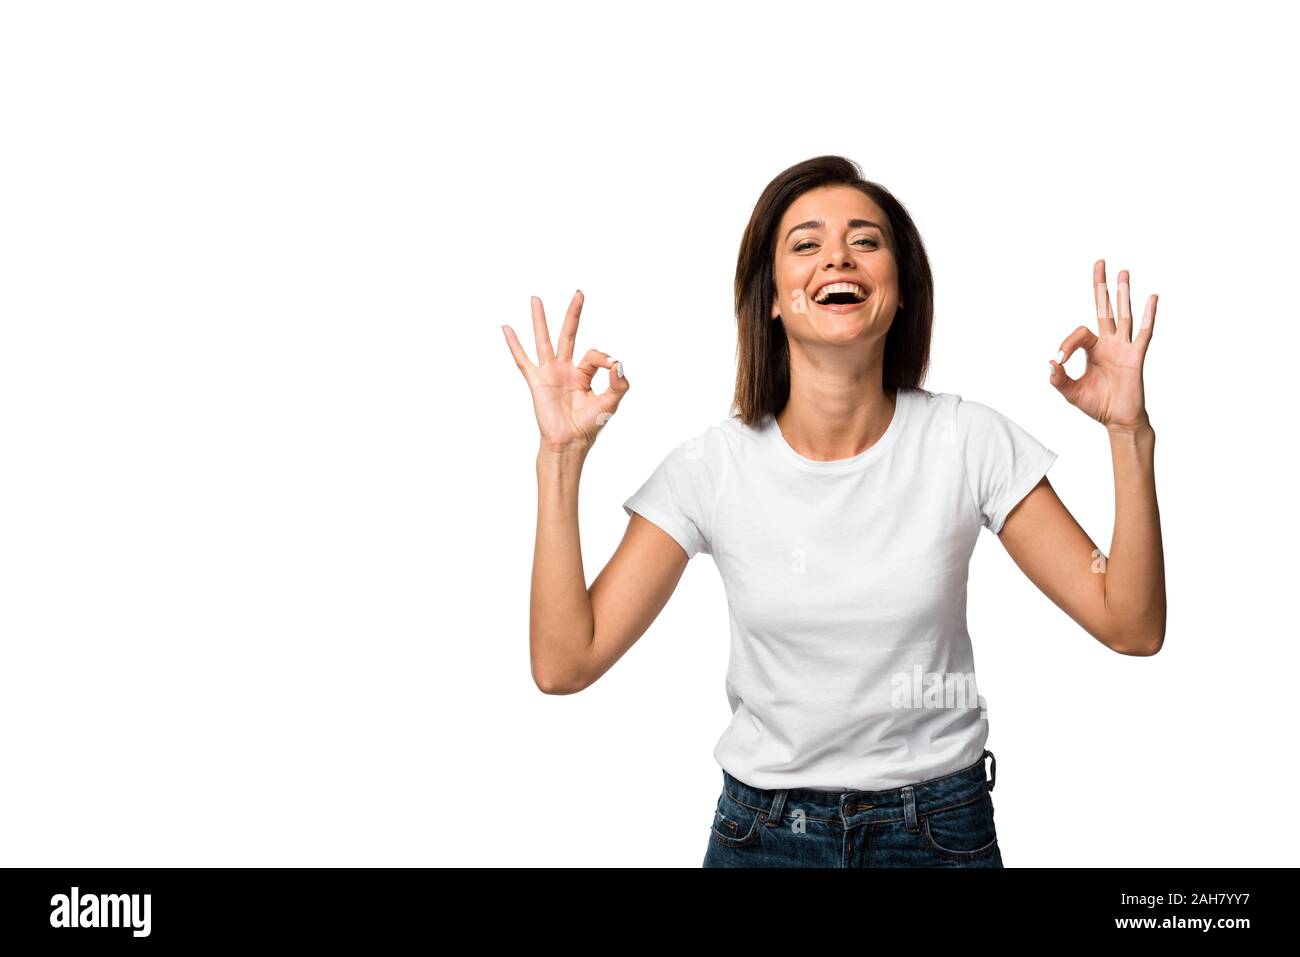 laughing woman in white t-shirt showing ok signs, isolated on white Stock Photo